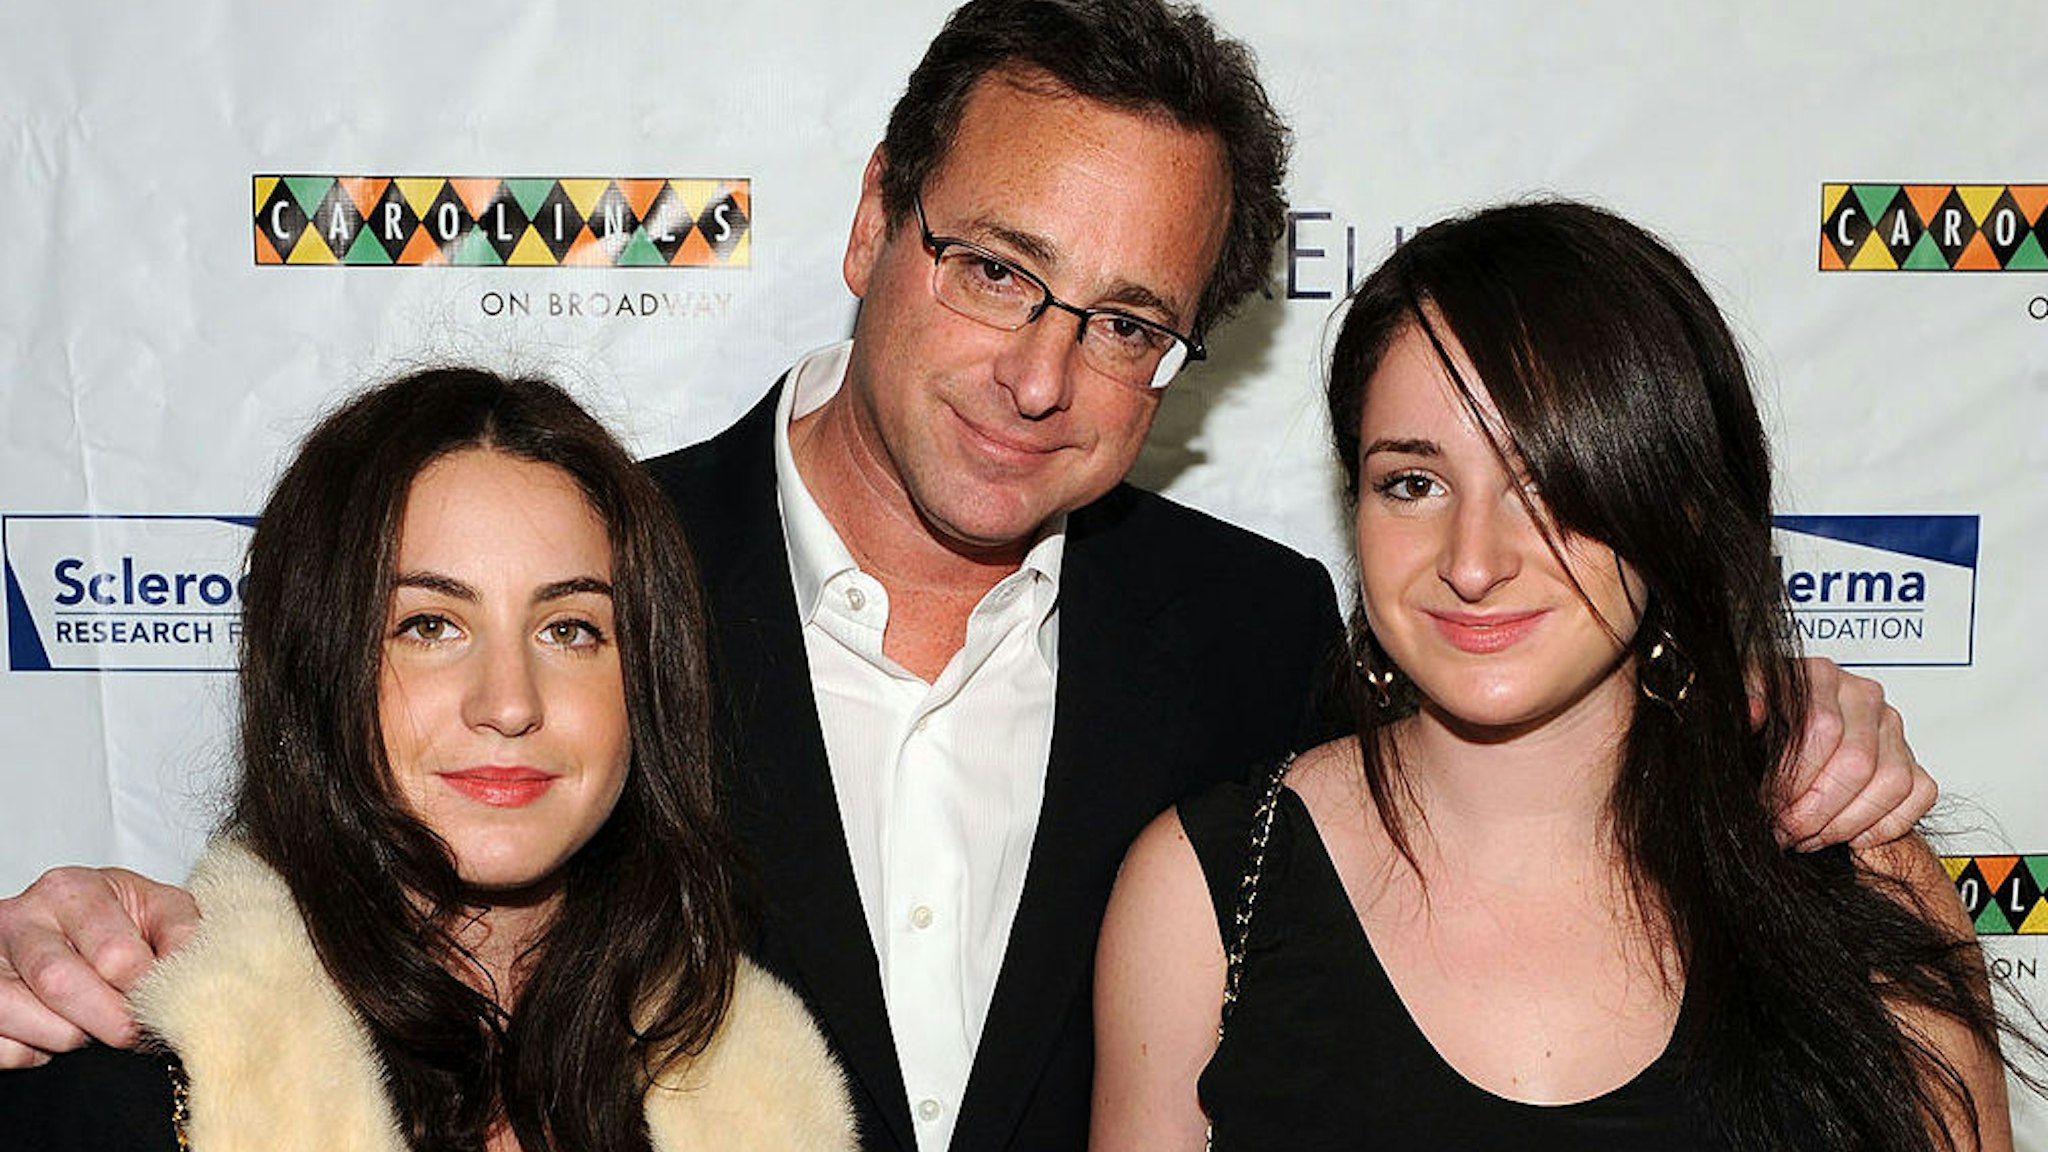 Actor and comedian Bob Saget (C) and his daughters Aubrey Saget (L) and Lara Saget attend "Cool Comedy - Hot Cuisine 2009" hosted by the Scleroderma Research Foundation at Carolines On Broadway on November 9, 2009 in New York City.